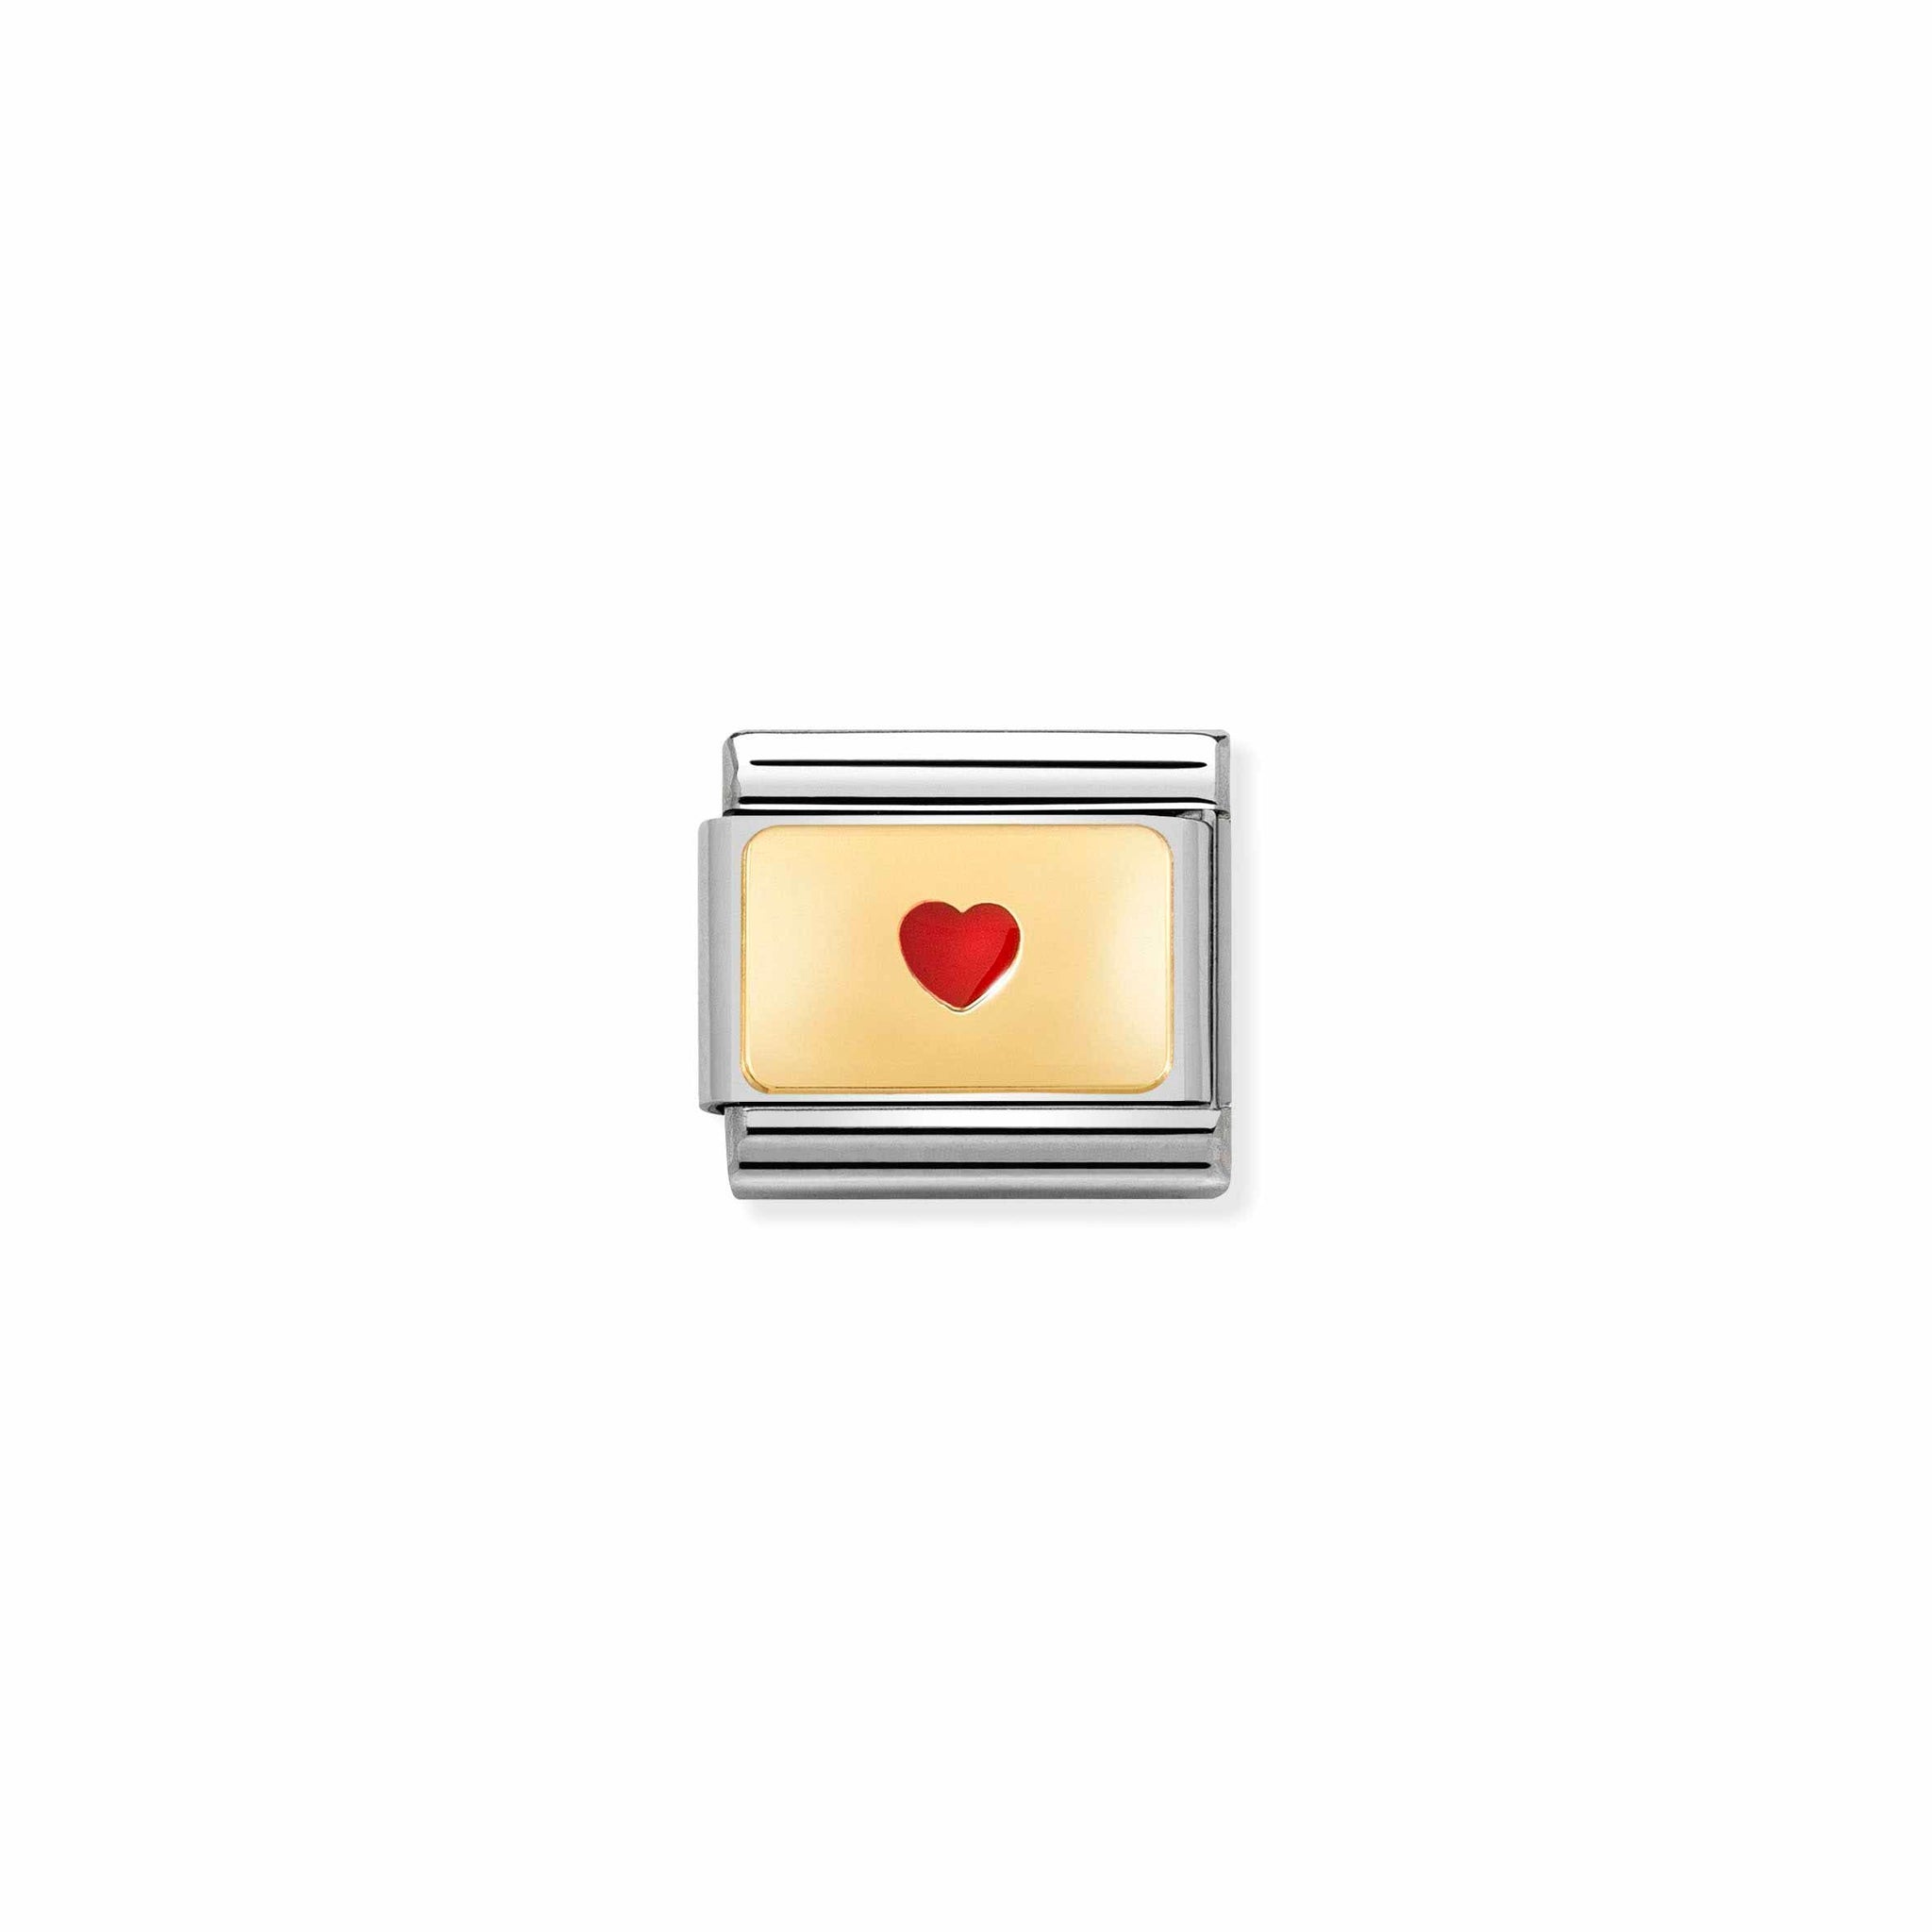 Nomination Charm - Gold Enamel - Small Heart - Red